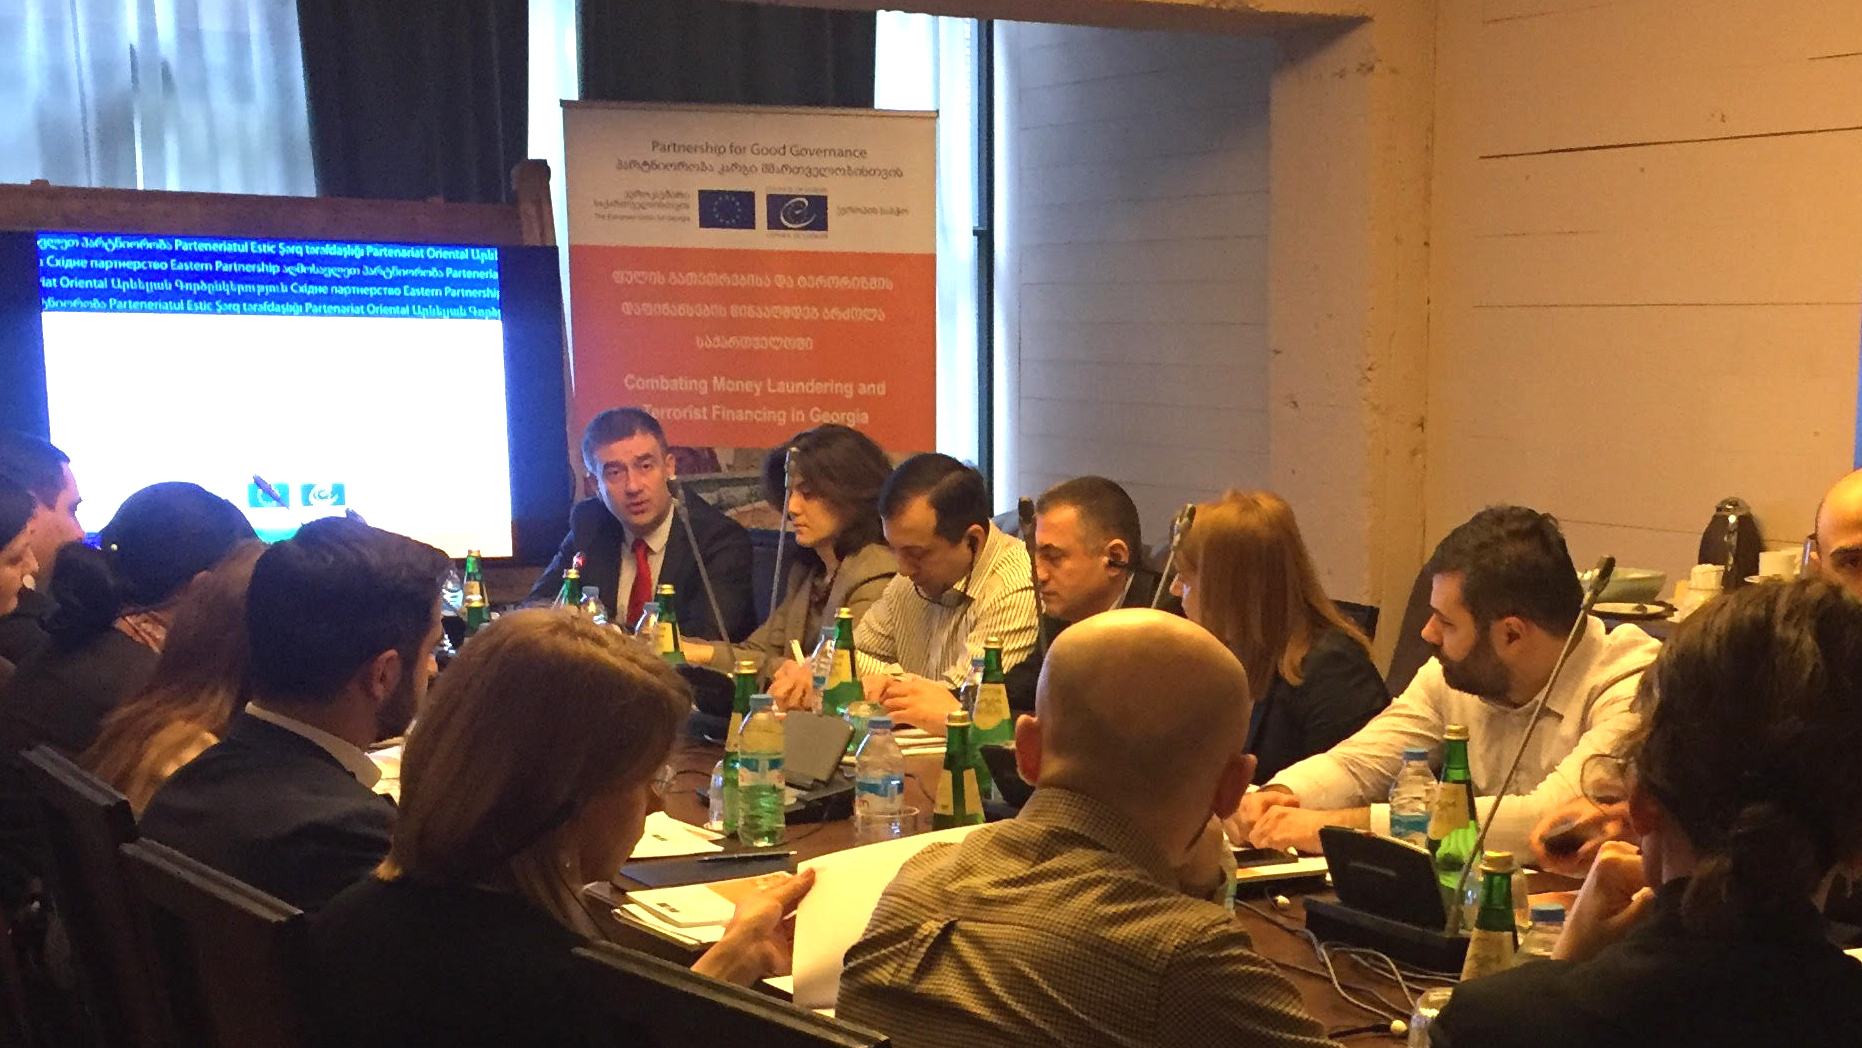 EU/CoE Partnership for Good Governance Project “Strengthening the anti-money laundering institutions in Georgia” holds its 2nd Steering Committee Meeting